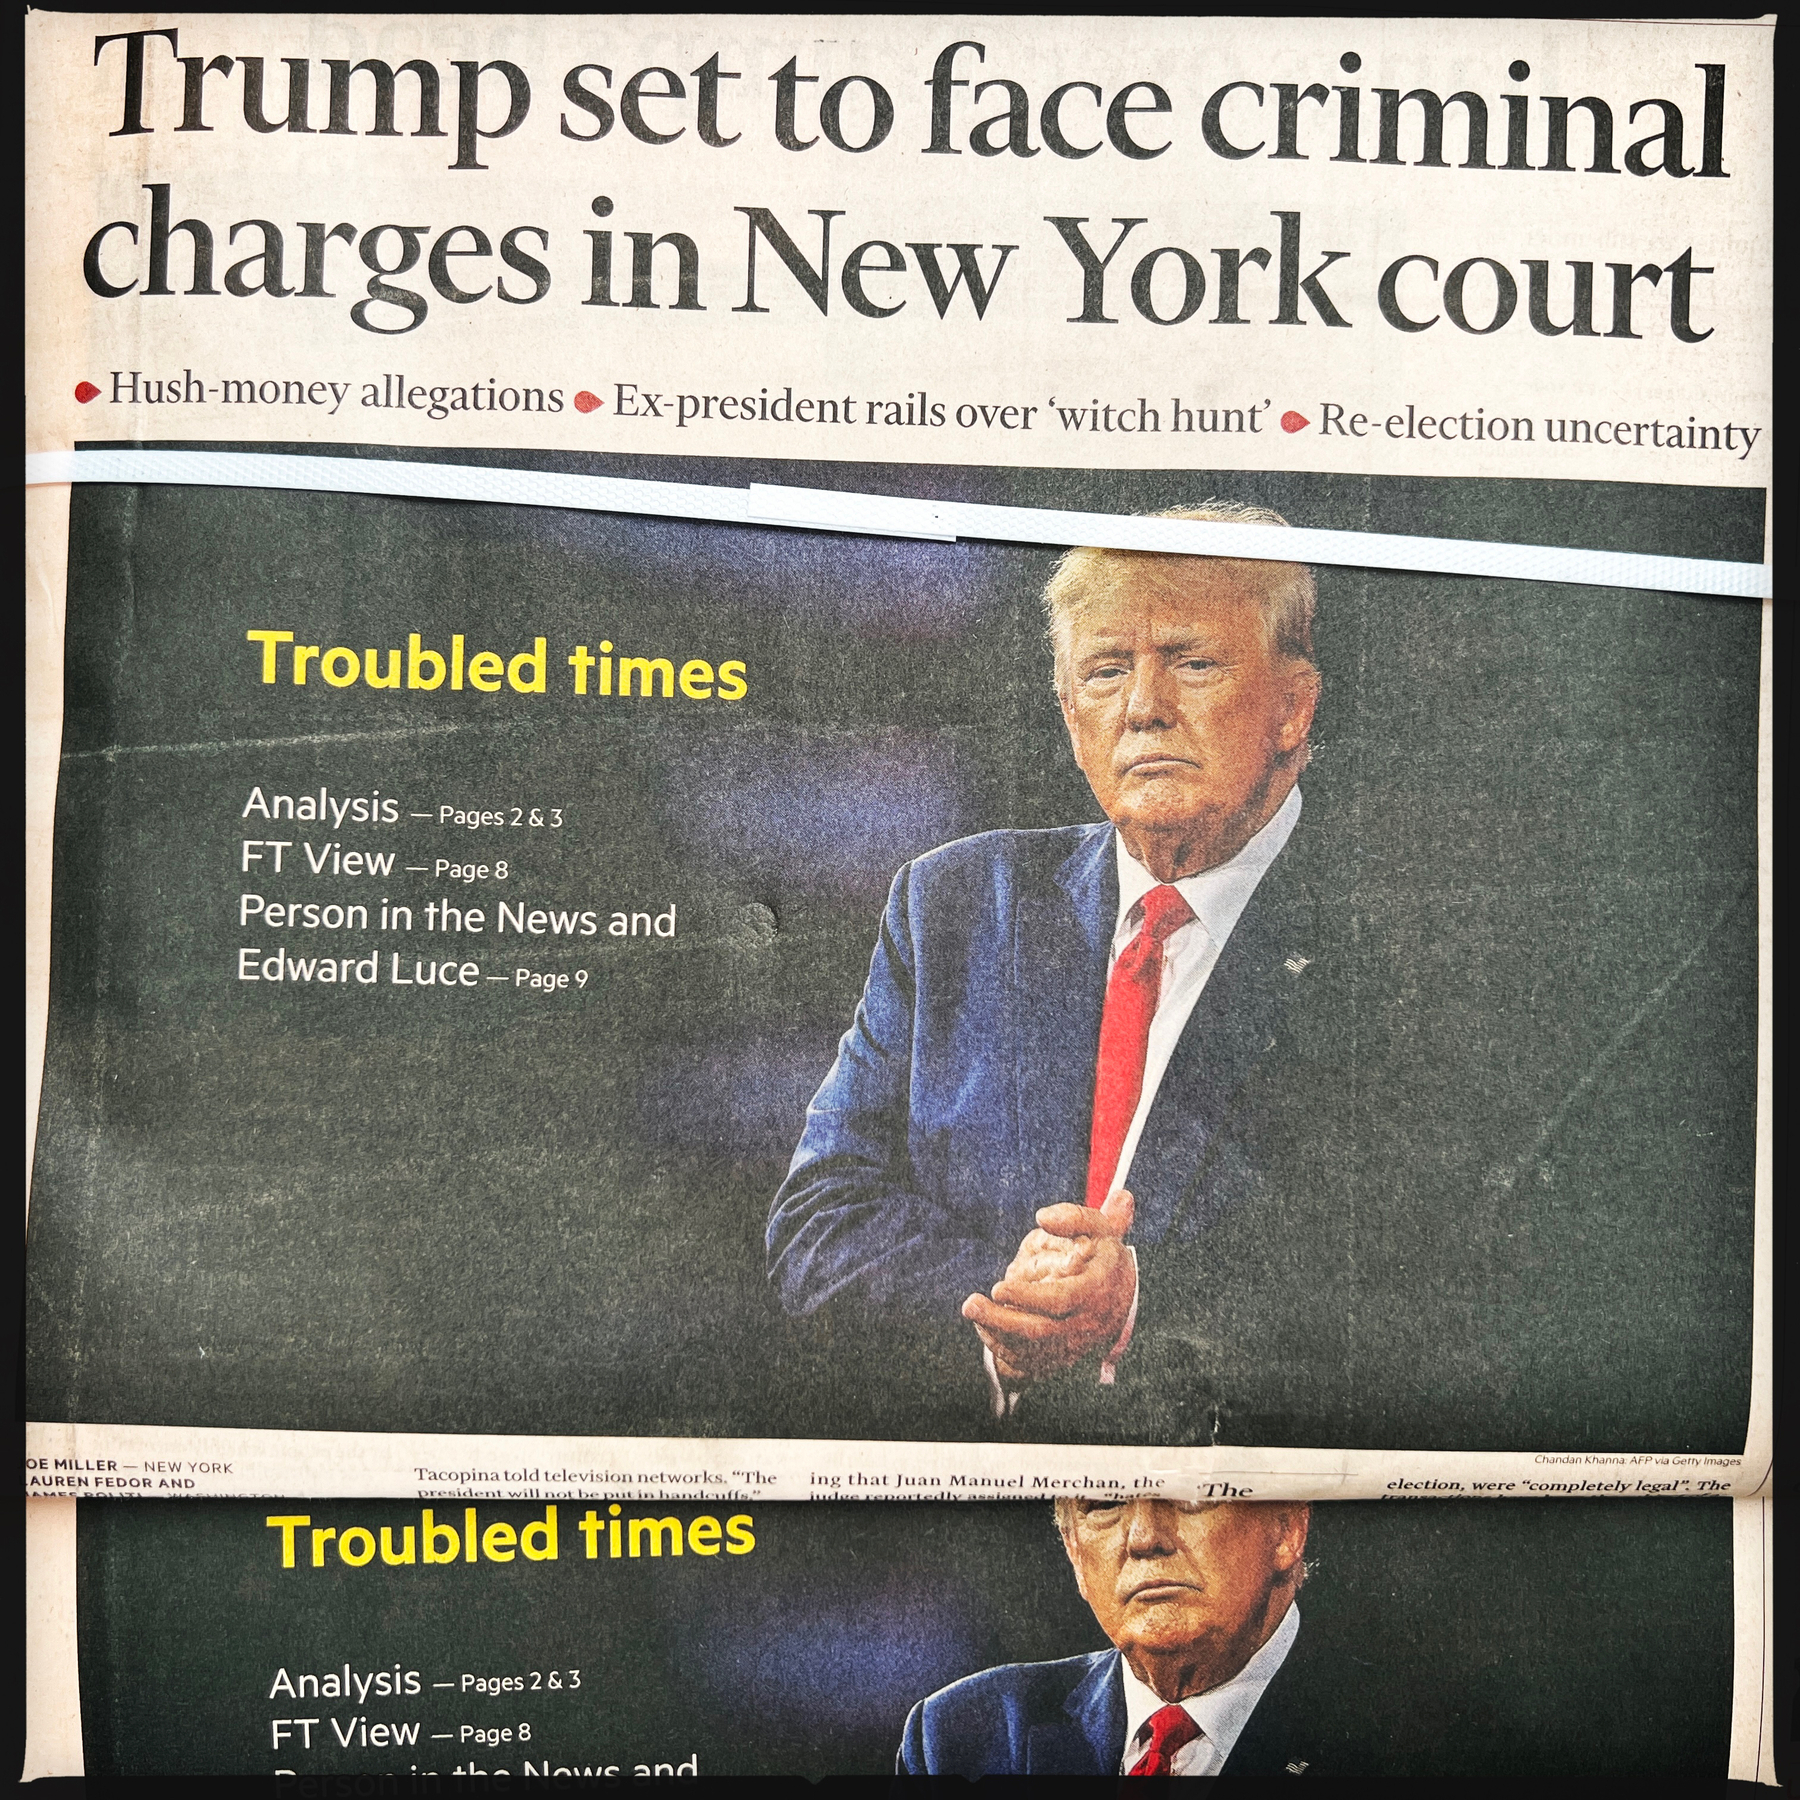 FT cover, with Trump, and the headline “Trump set to face criminal charges in New York court”.